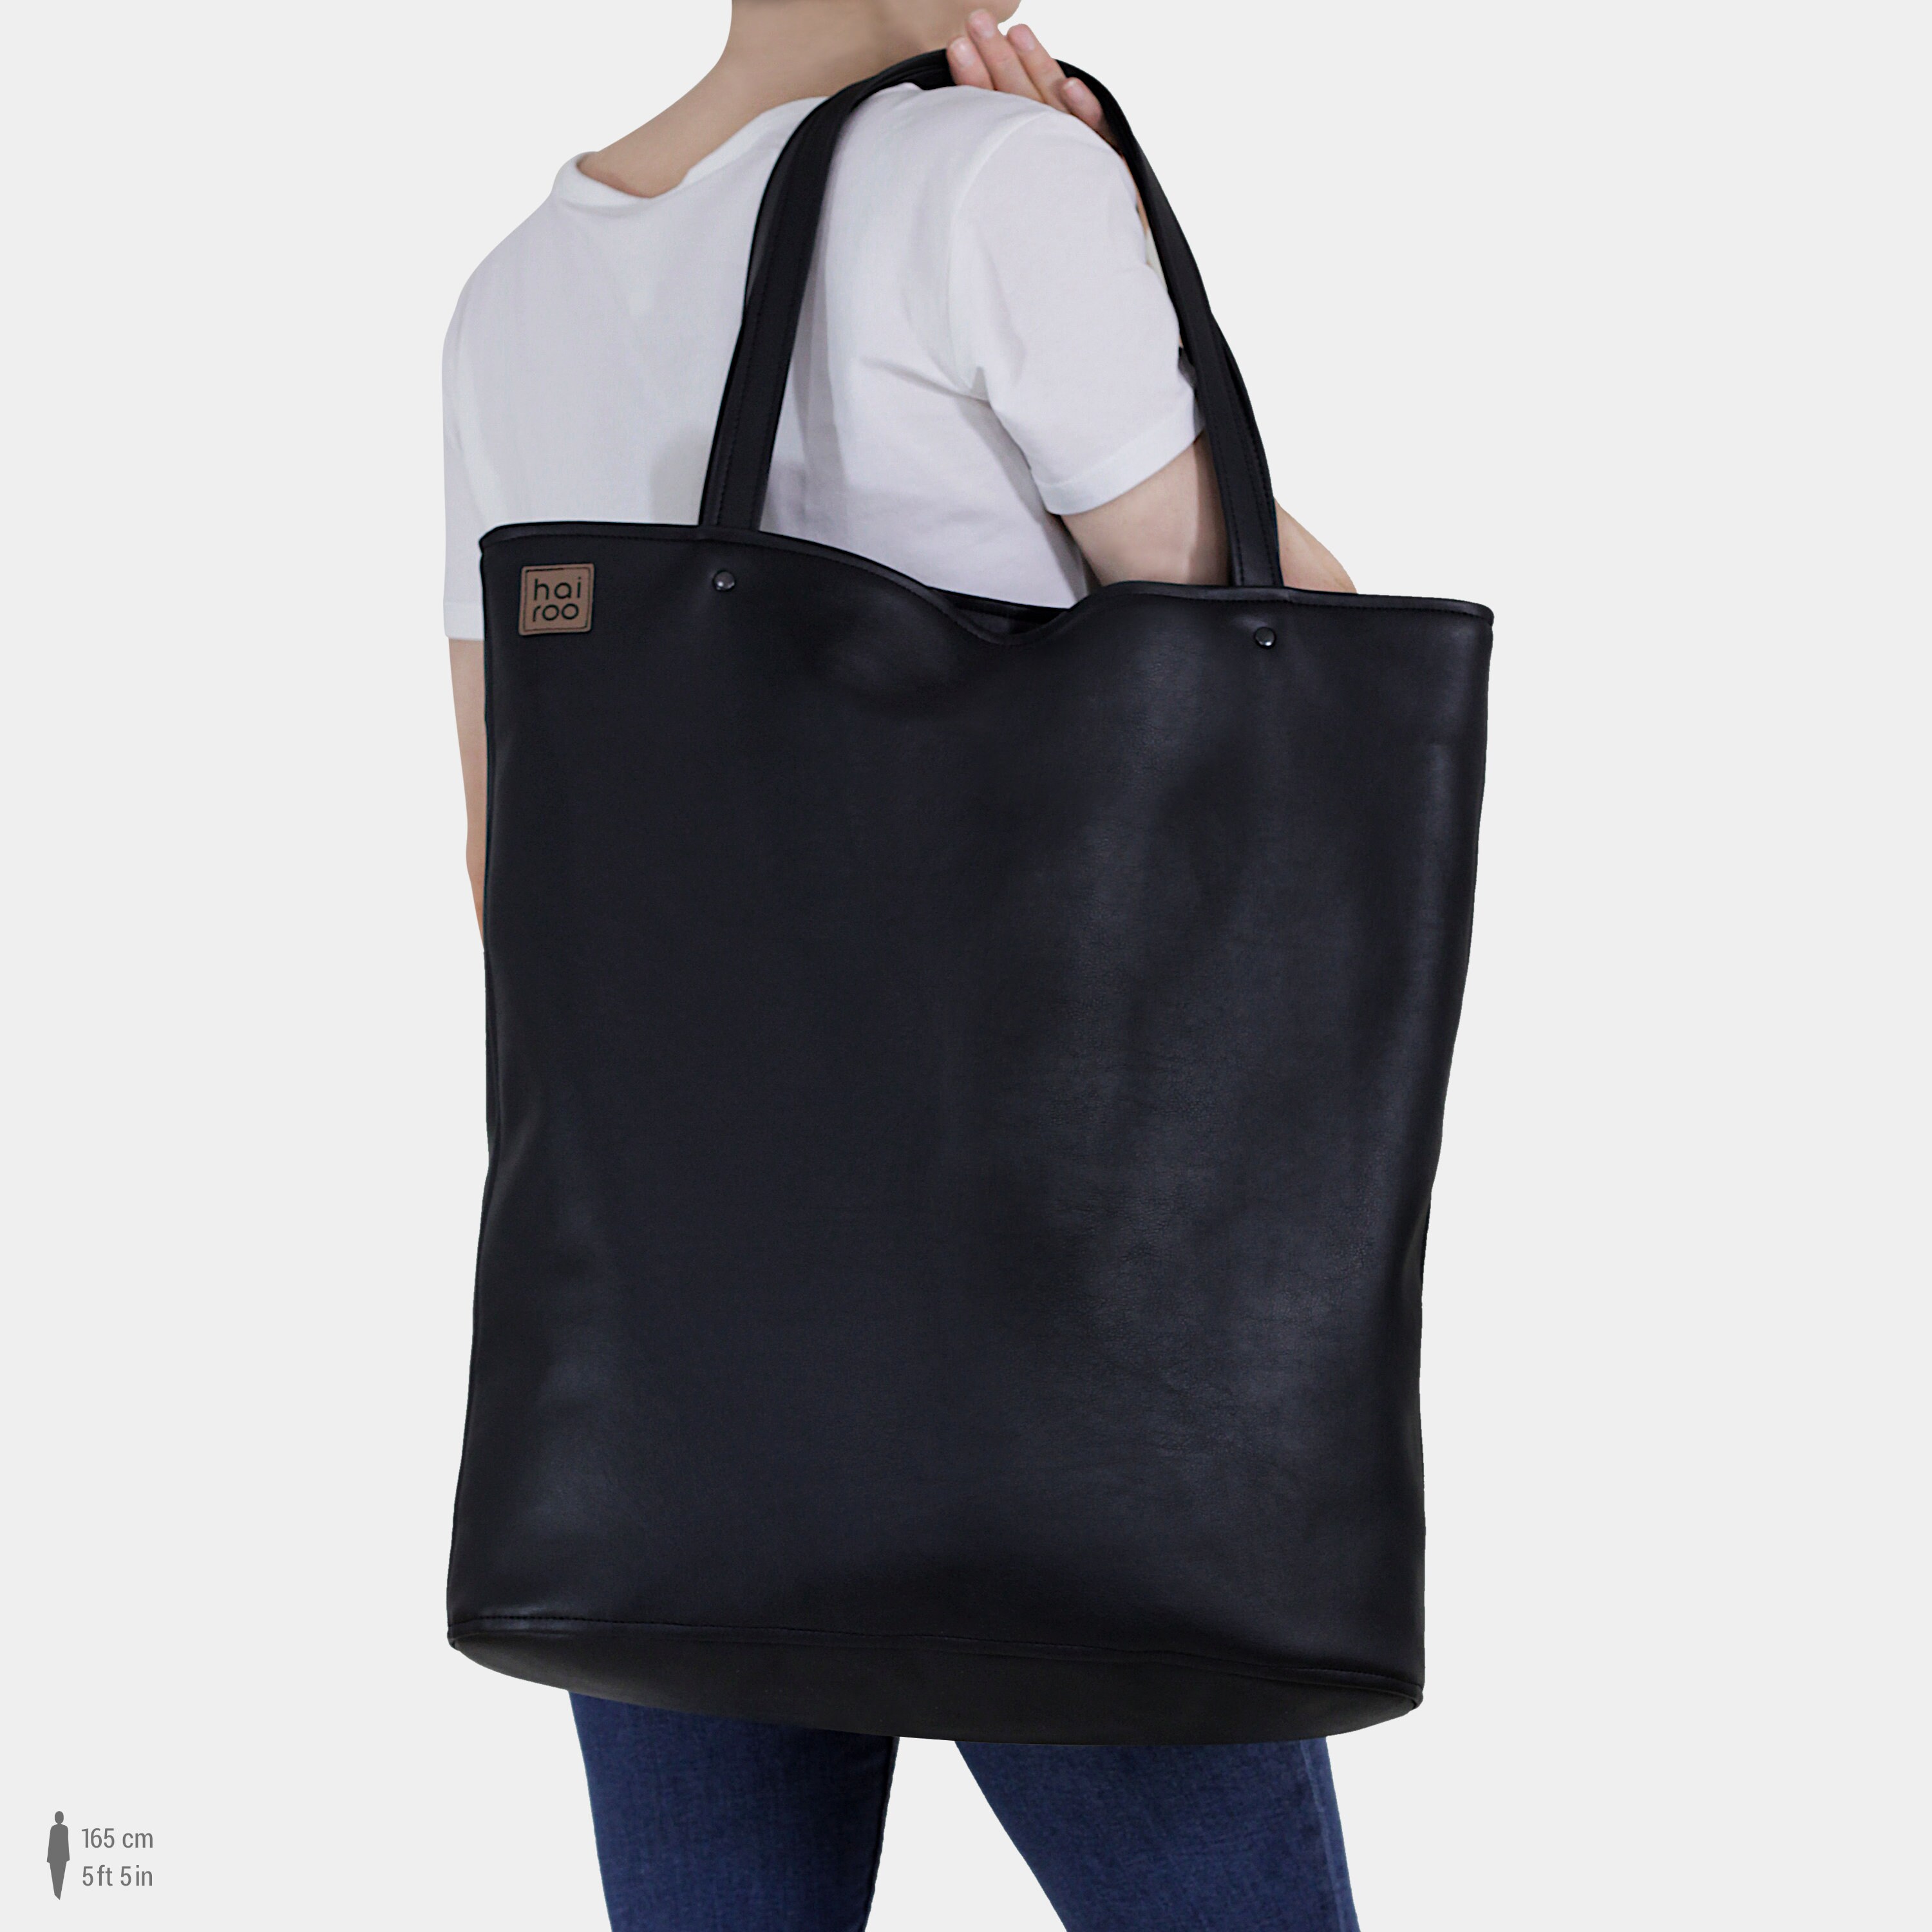 Brand LB Tote HandBag With Three Compartment and Fabulous Quality